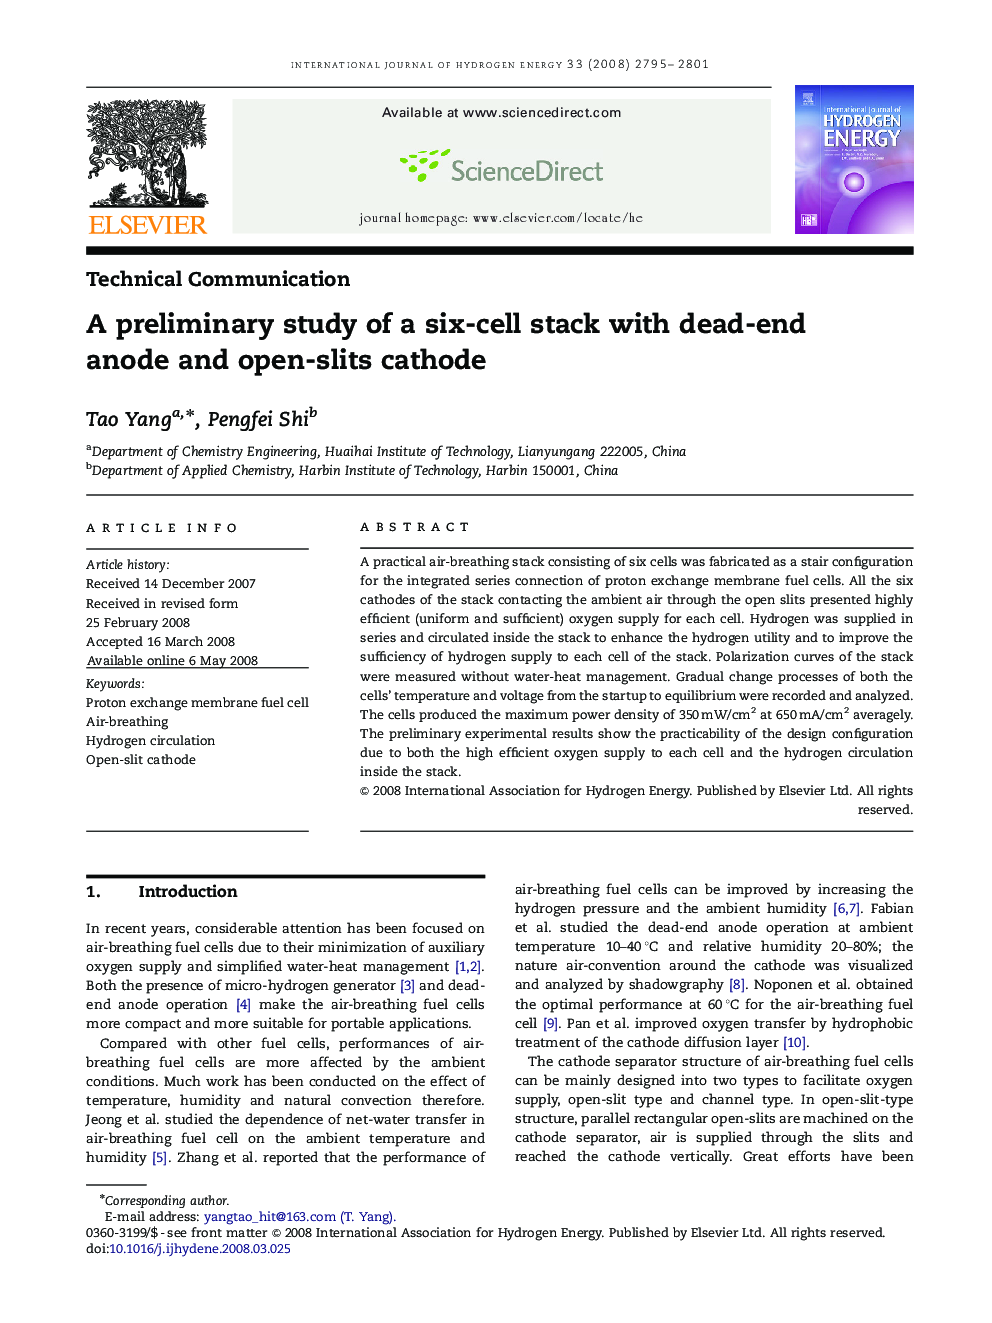 A preliminary study of a six-cell stack with dead-end anode and open-slits cathode